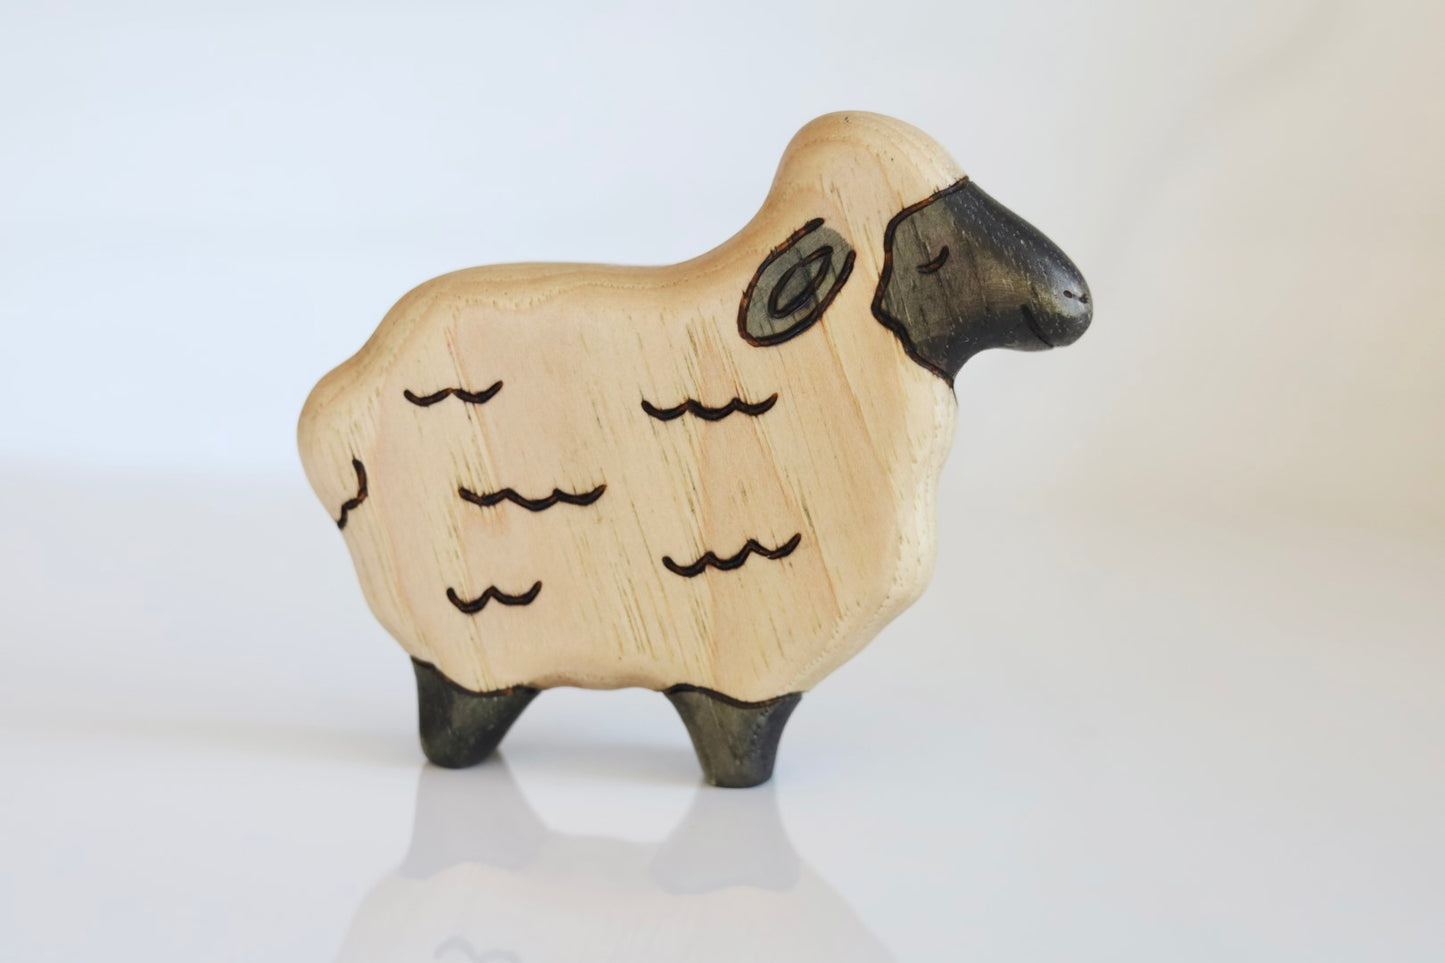 Wooden Sheep Toy